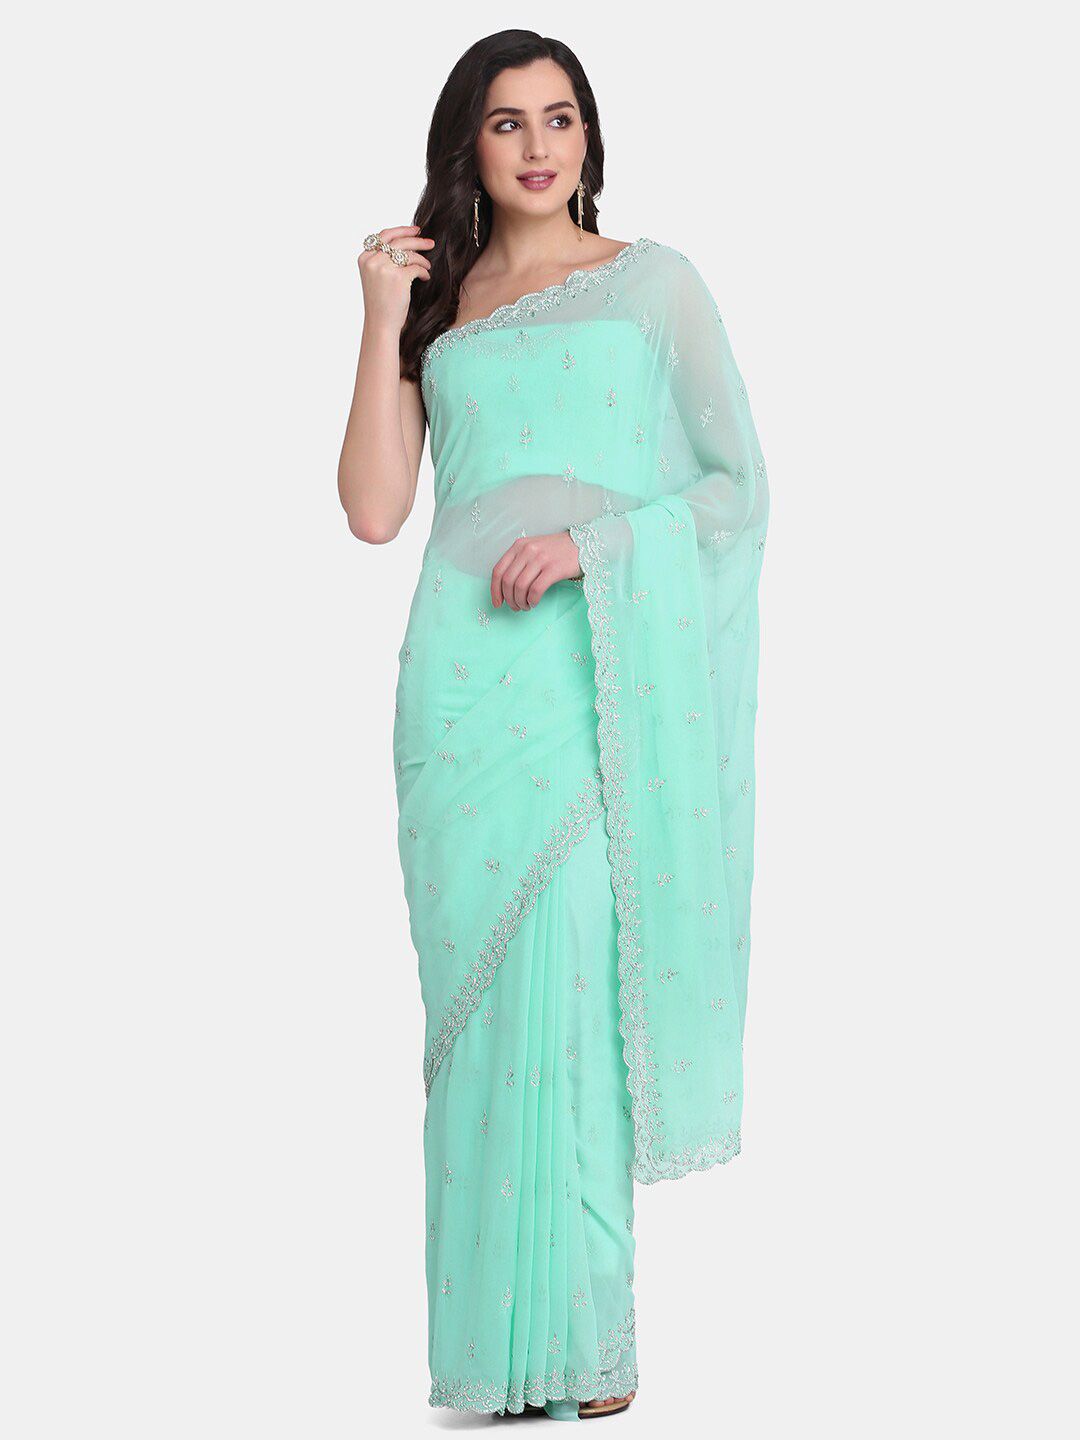 BOMBAY SELECTIONS Green & White Embellished Pure Georgette Saree Price in India